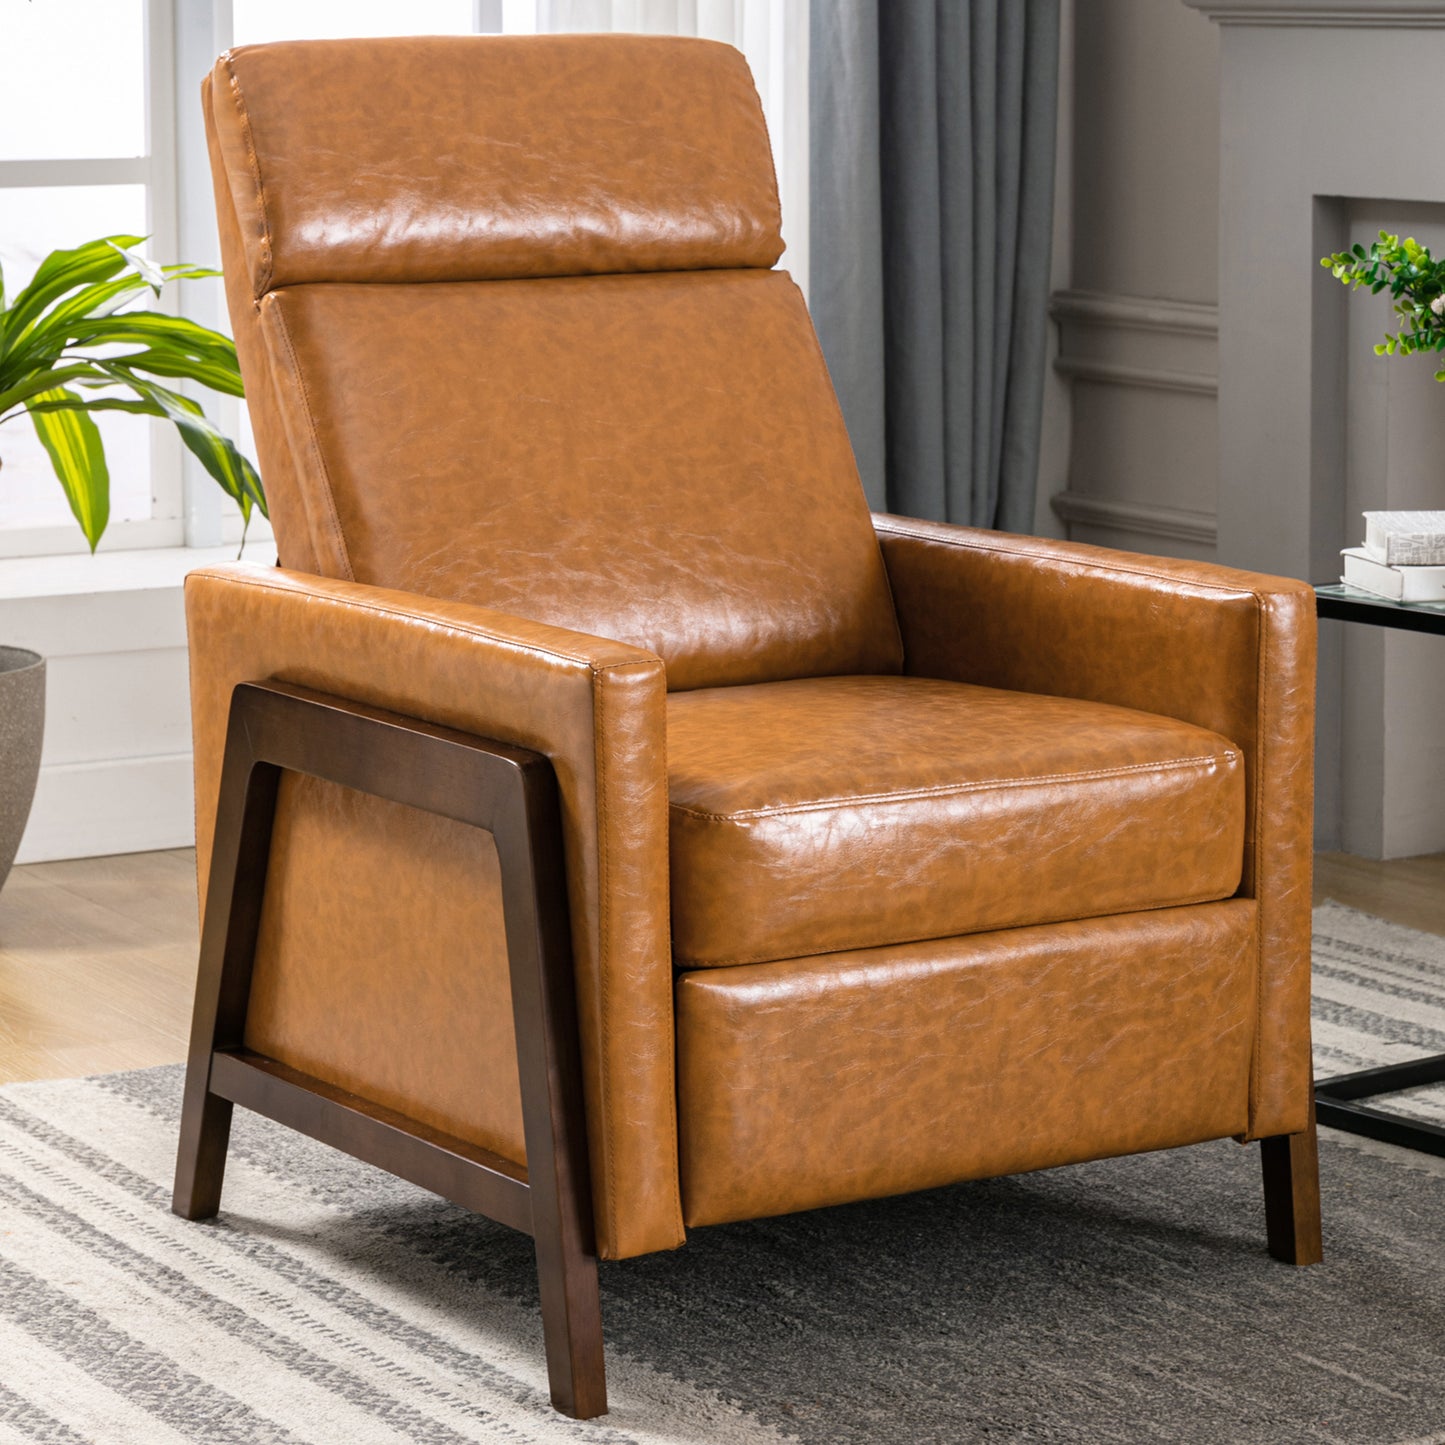 Camelot, Solid Wood Leather Recliner